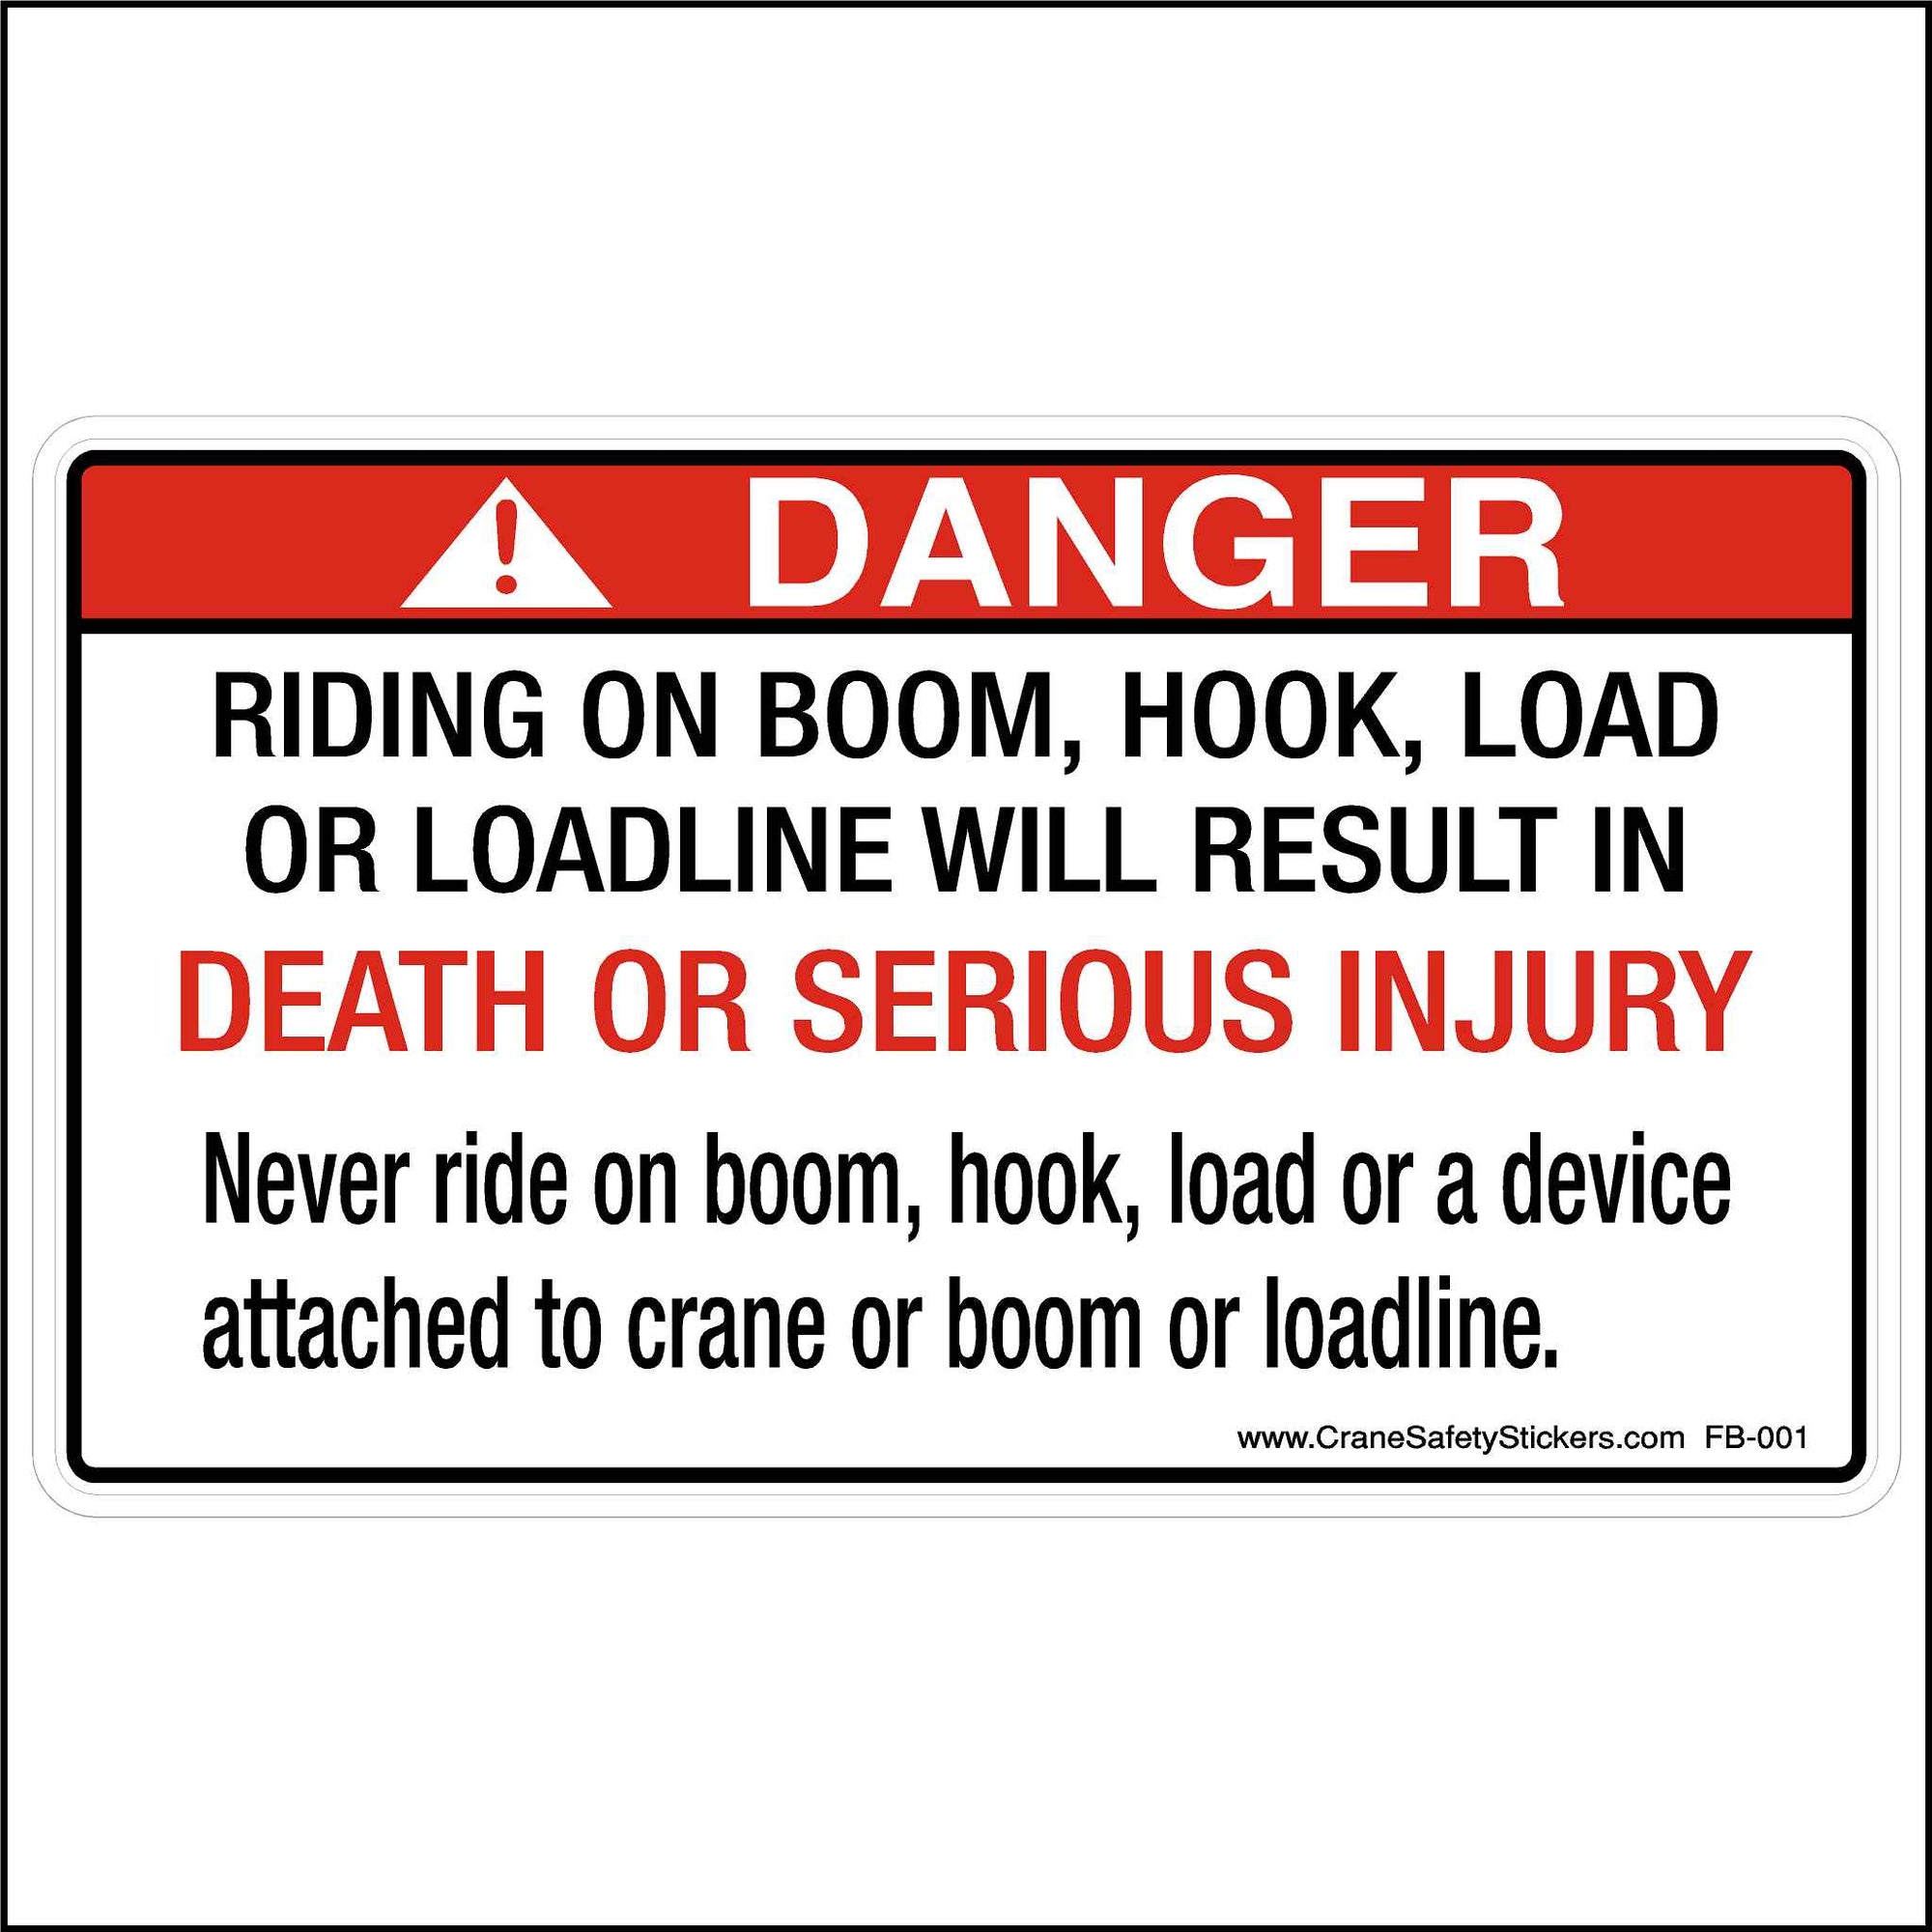 Riding On Boom Hook Load Or Loadline Sticker printed with.  Danger riding on boom, hook, or loadline will result in death or serious injury. Never ride on boom, hook, load, or a device attached to crane or boom or loadline.